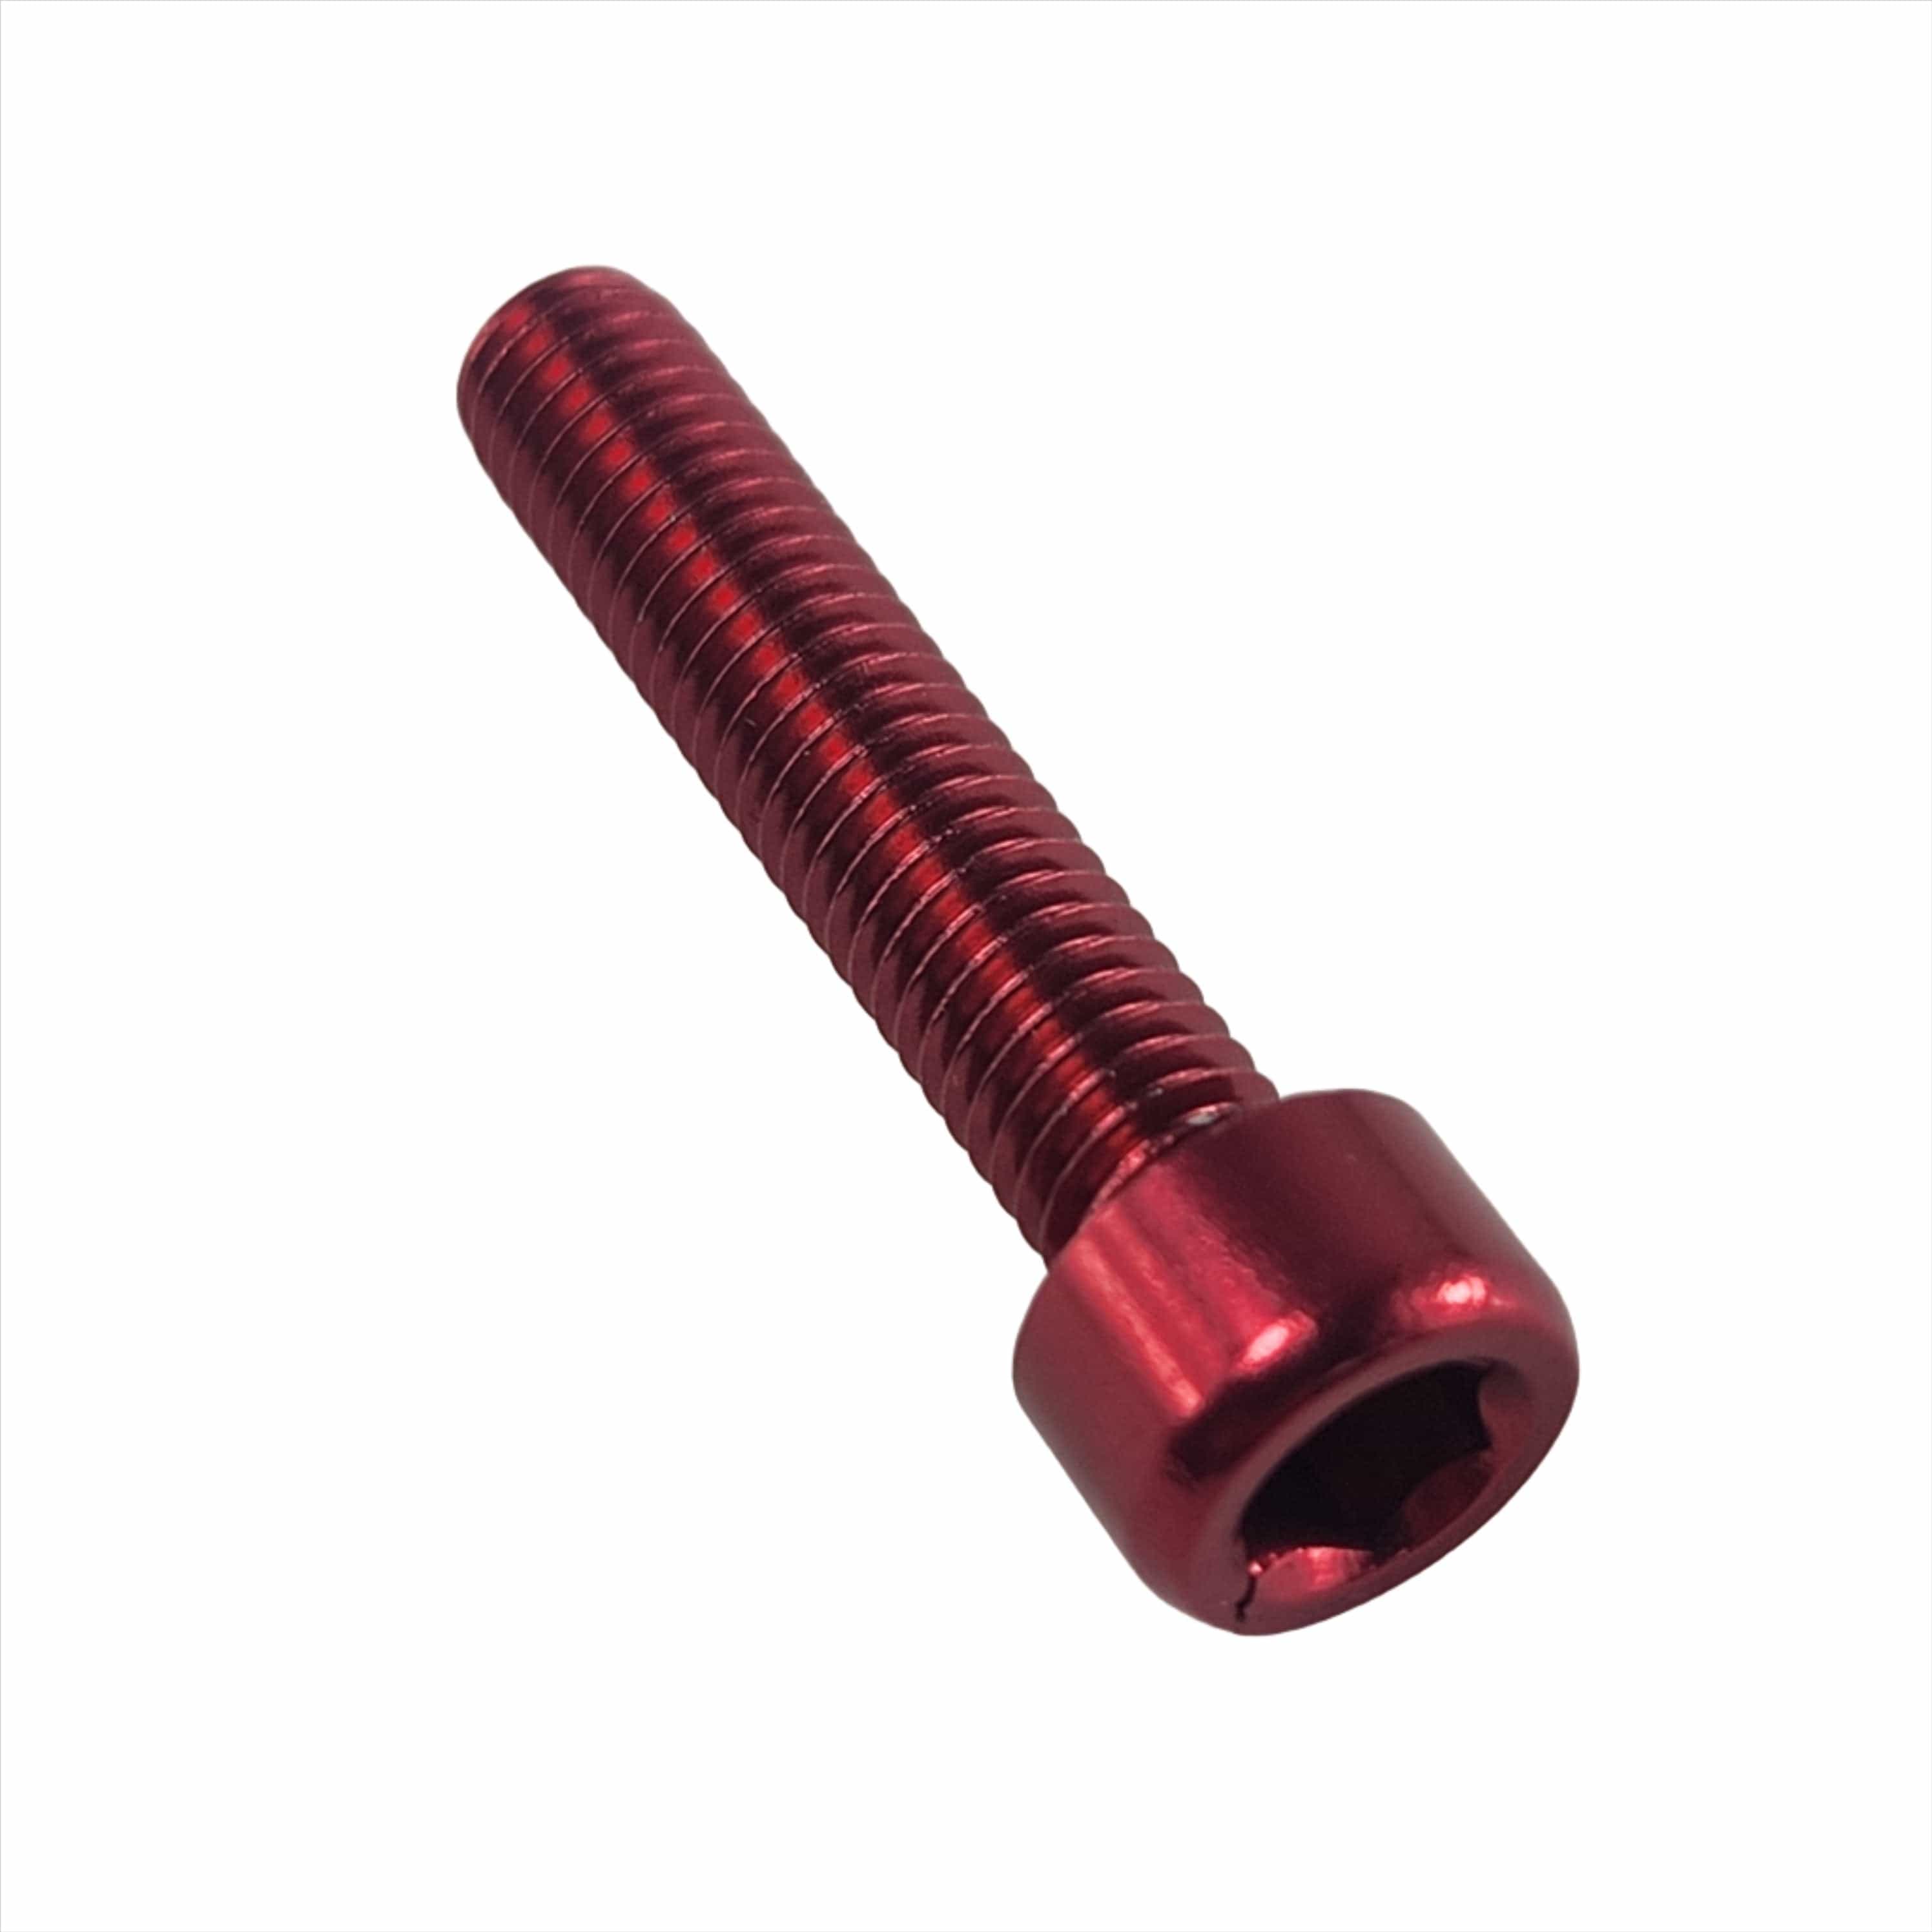 Witchdoctors Colored Bolt Kits Red Cam Side Cover Bolts (Sold Each) 25mm by Witchdoctors CSB-COL-RED